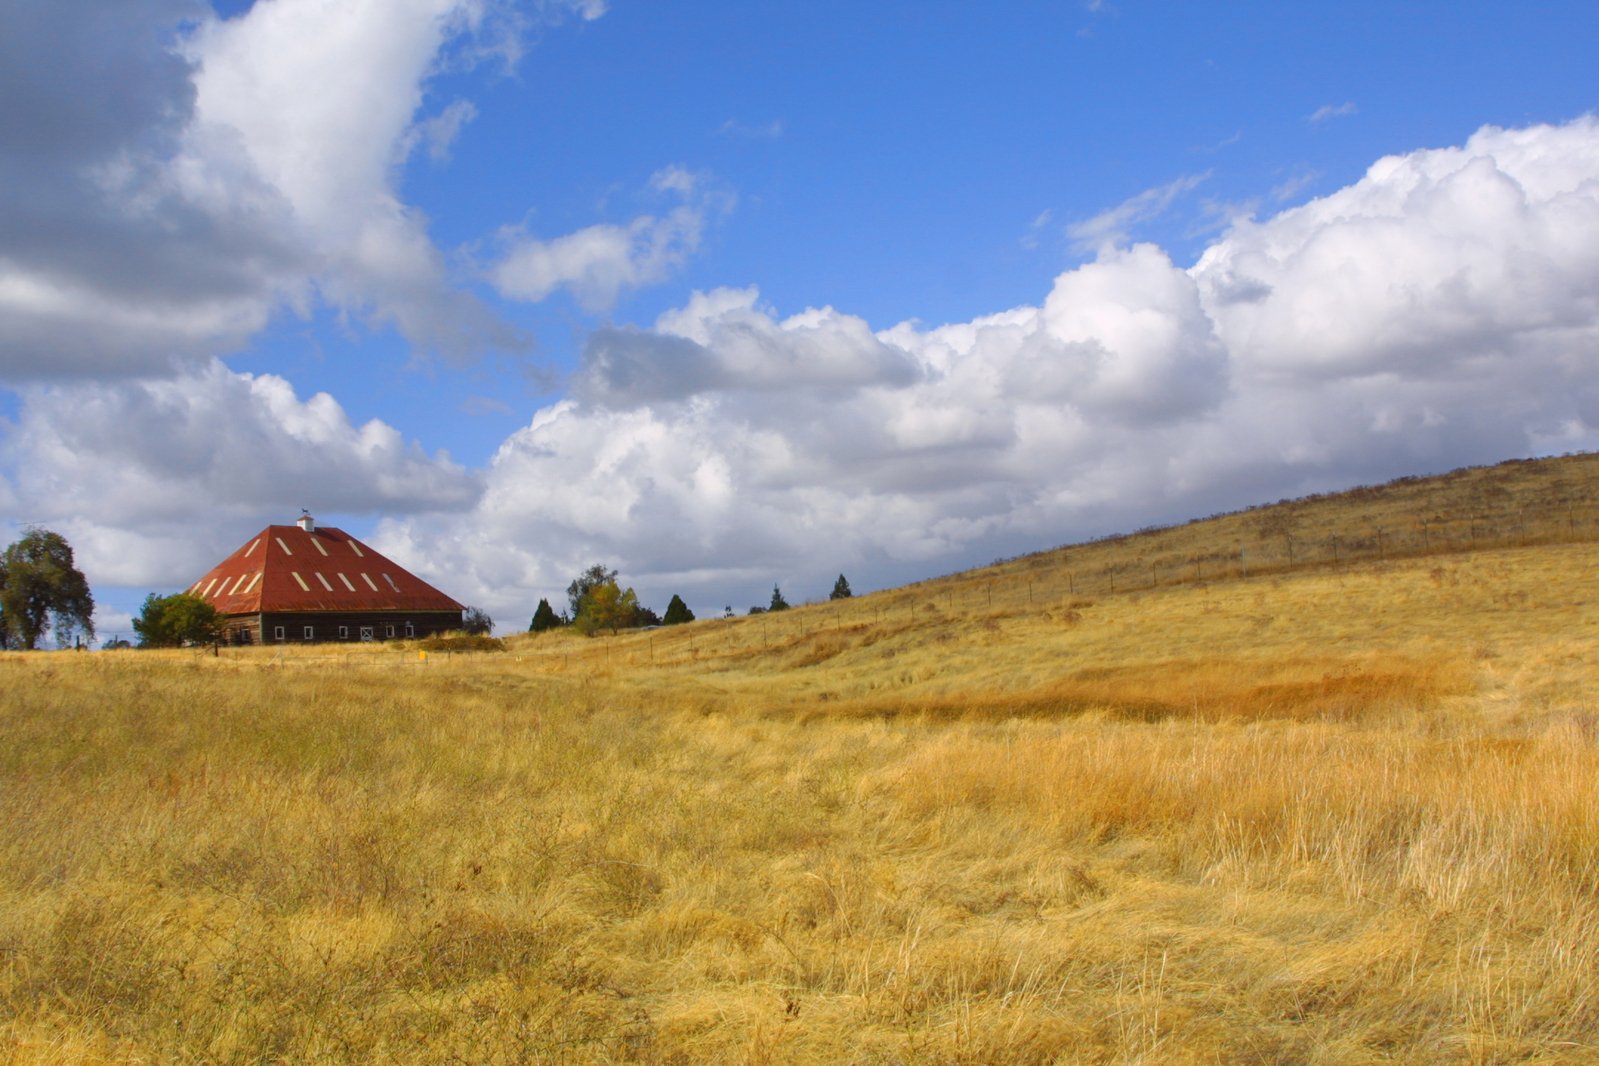 a barn in the middle of the field under a blue cloudy sky